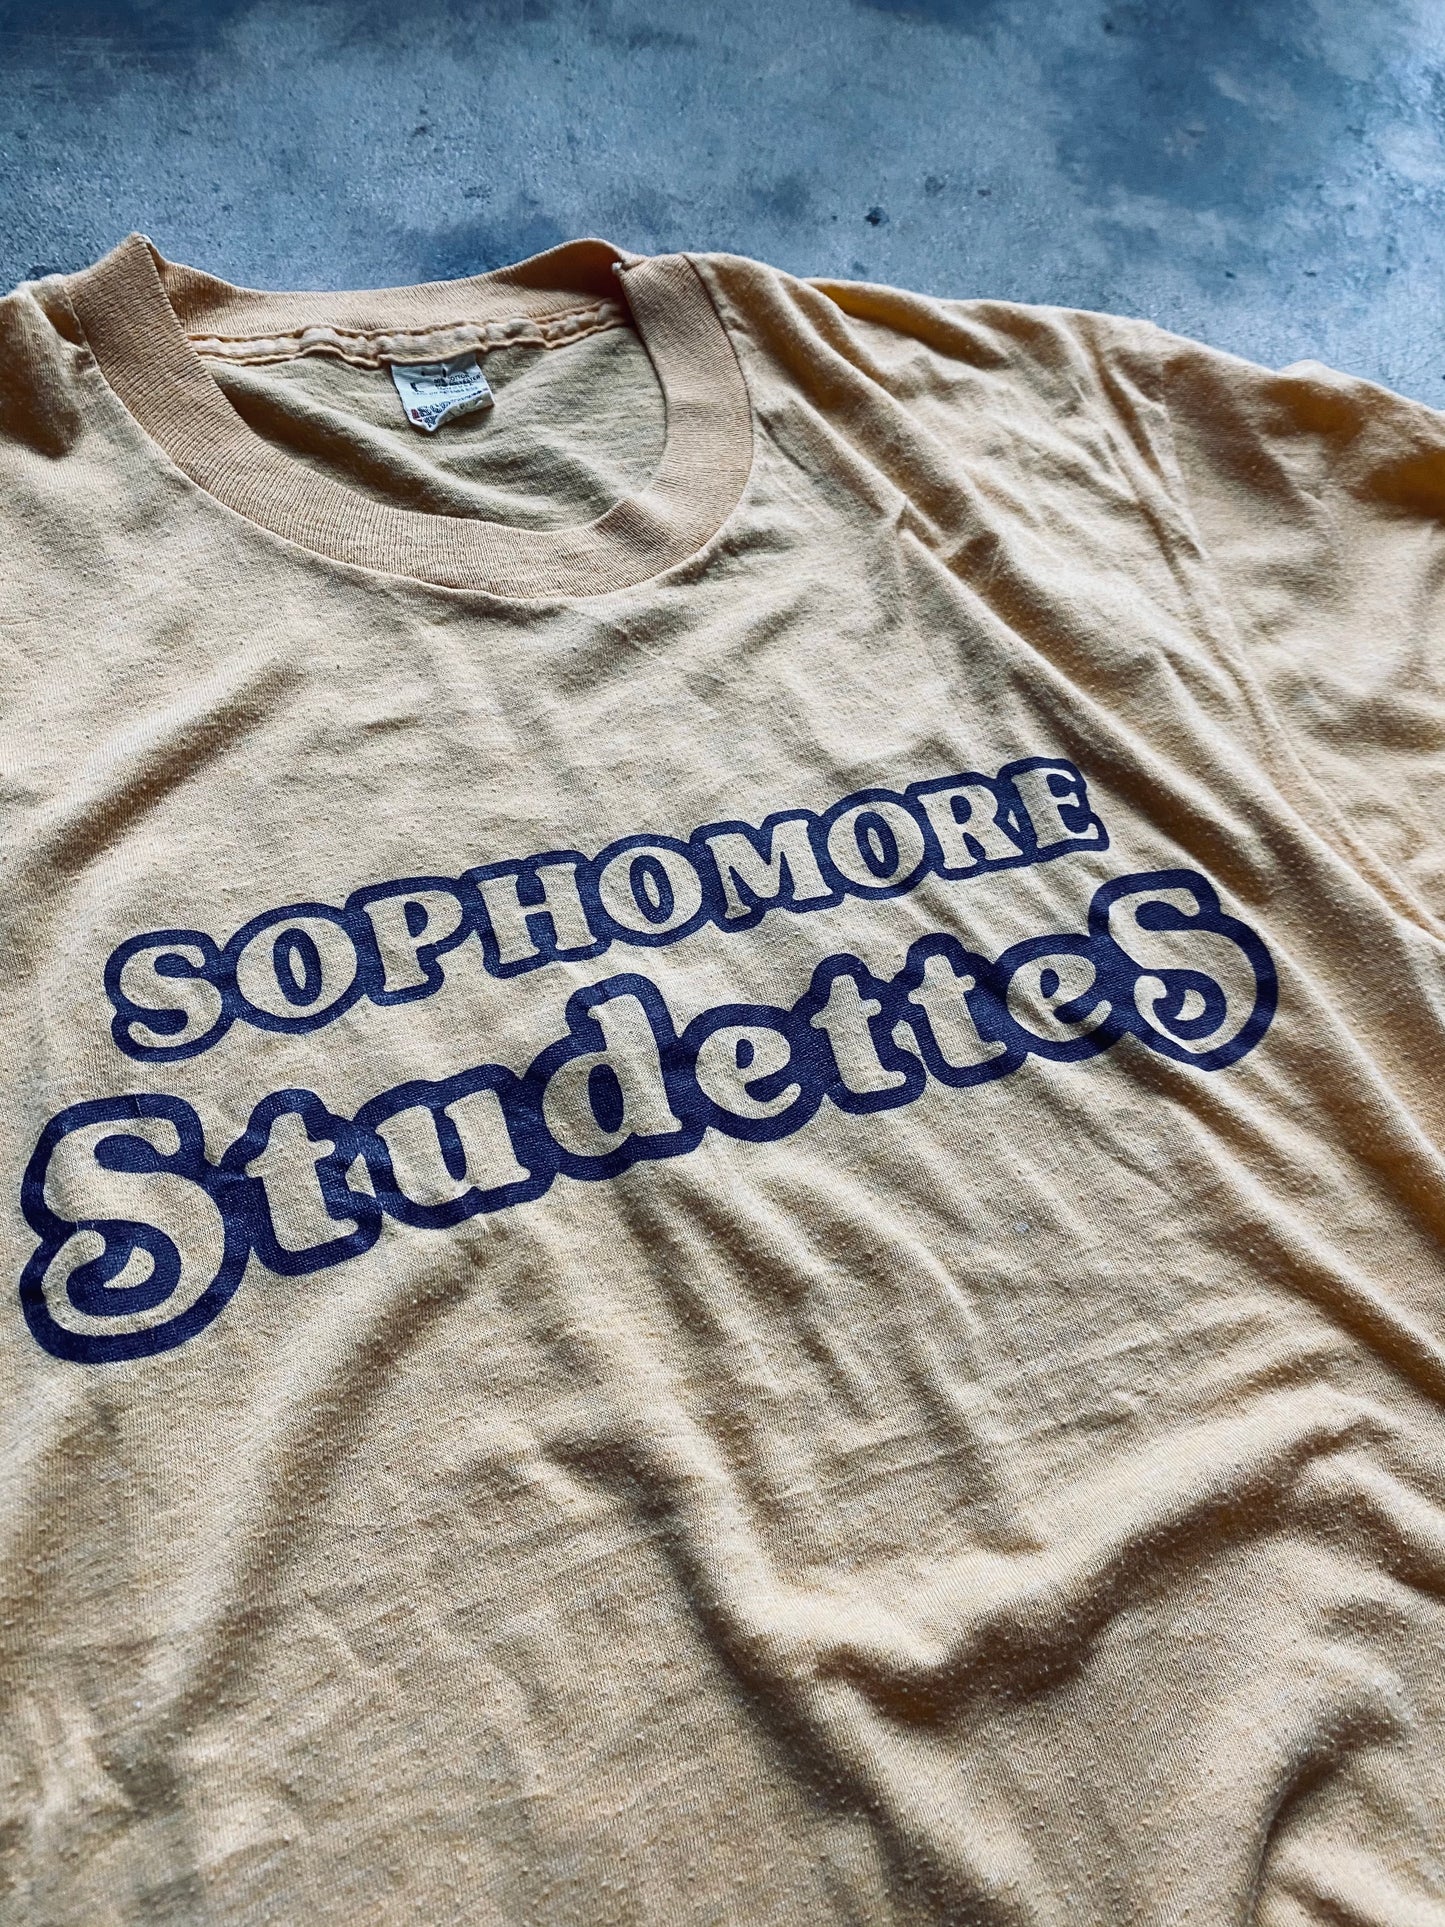 1980s Screen Stars “Sophomore Studettes” Tee | Large